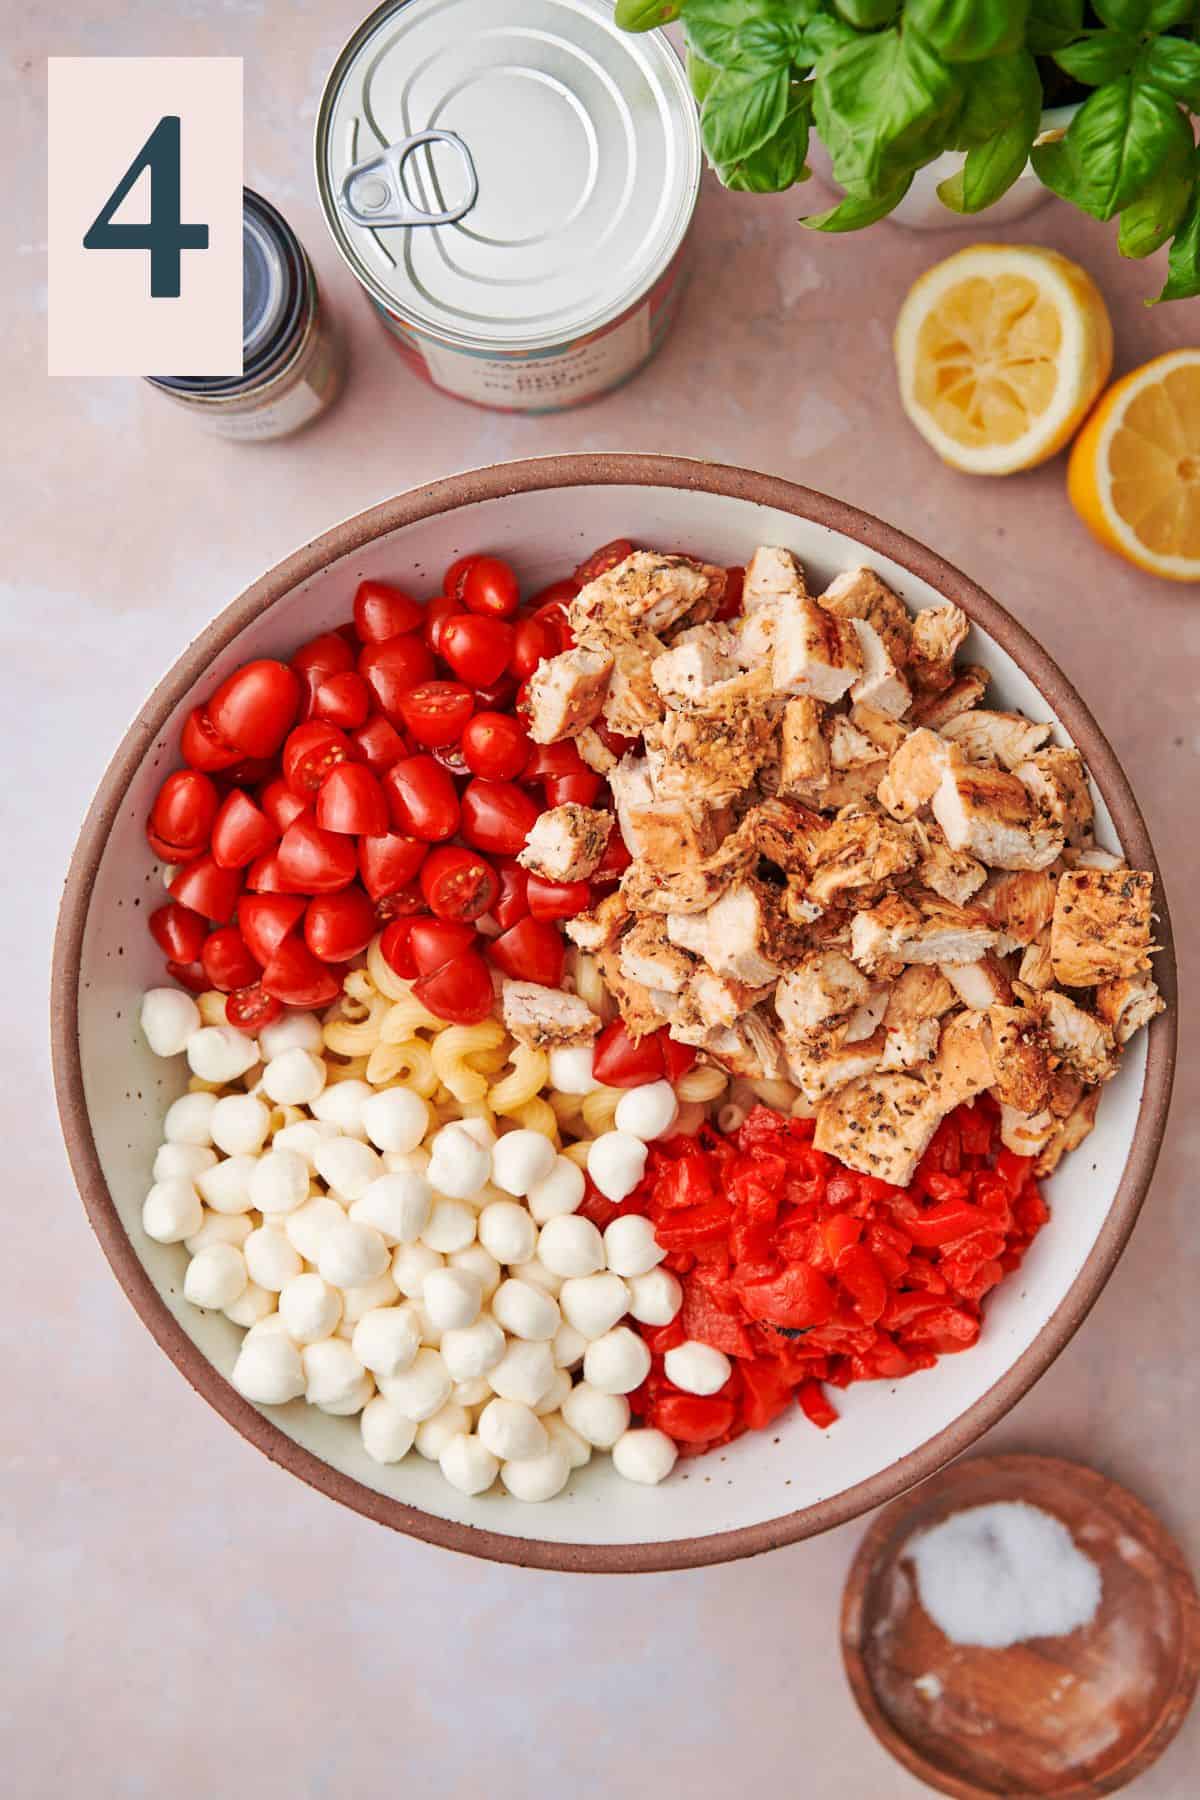 Large bowl with cooked pasta, cherry tomatoes, cut chicken, sliced red peppers, and mozzarella pearls.